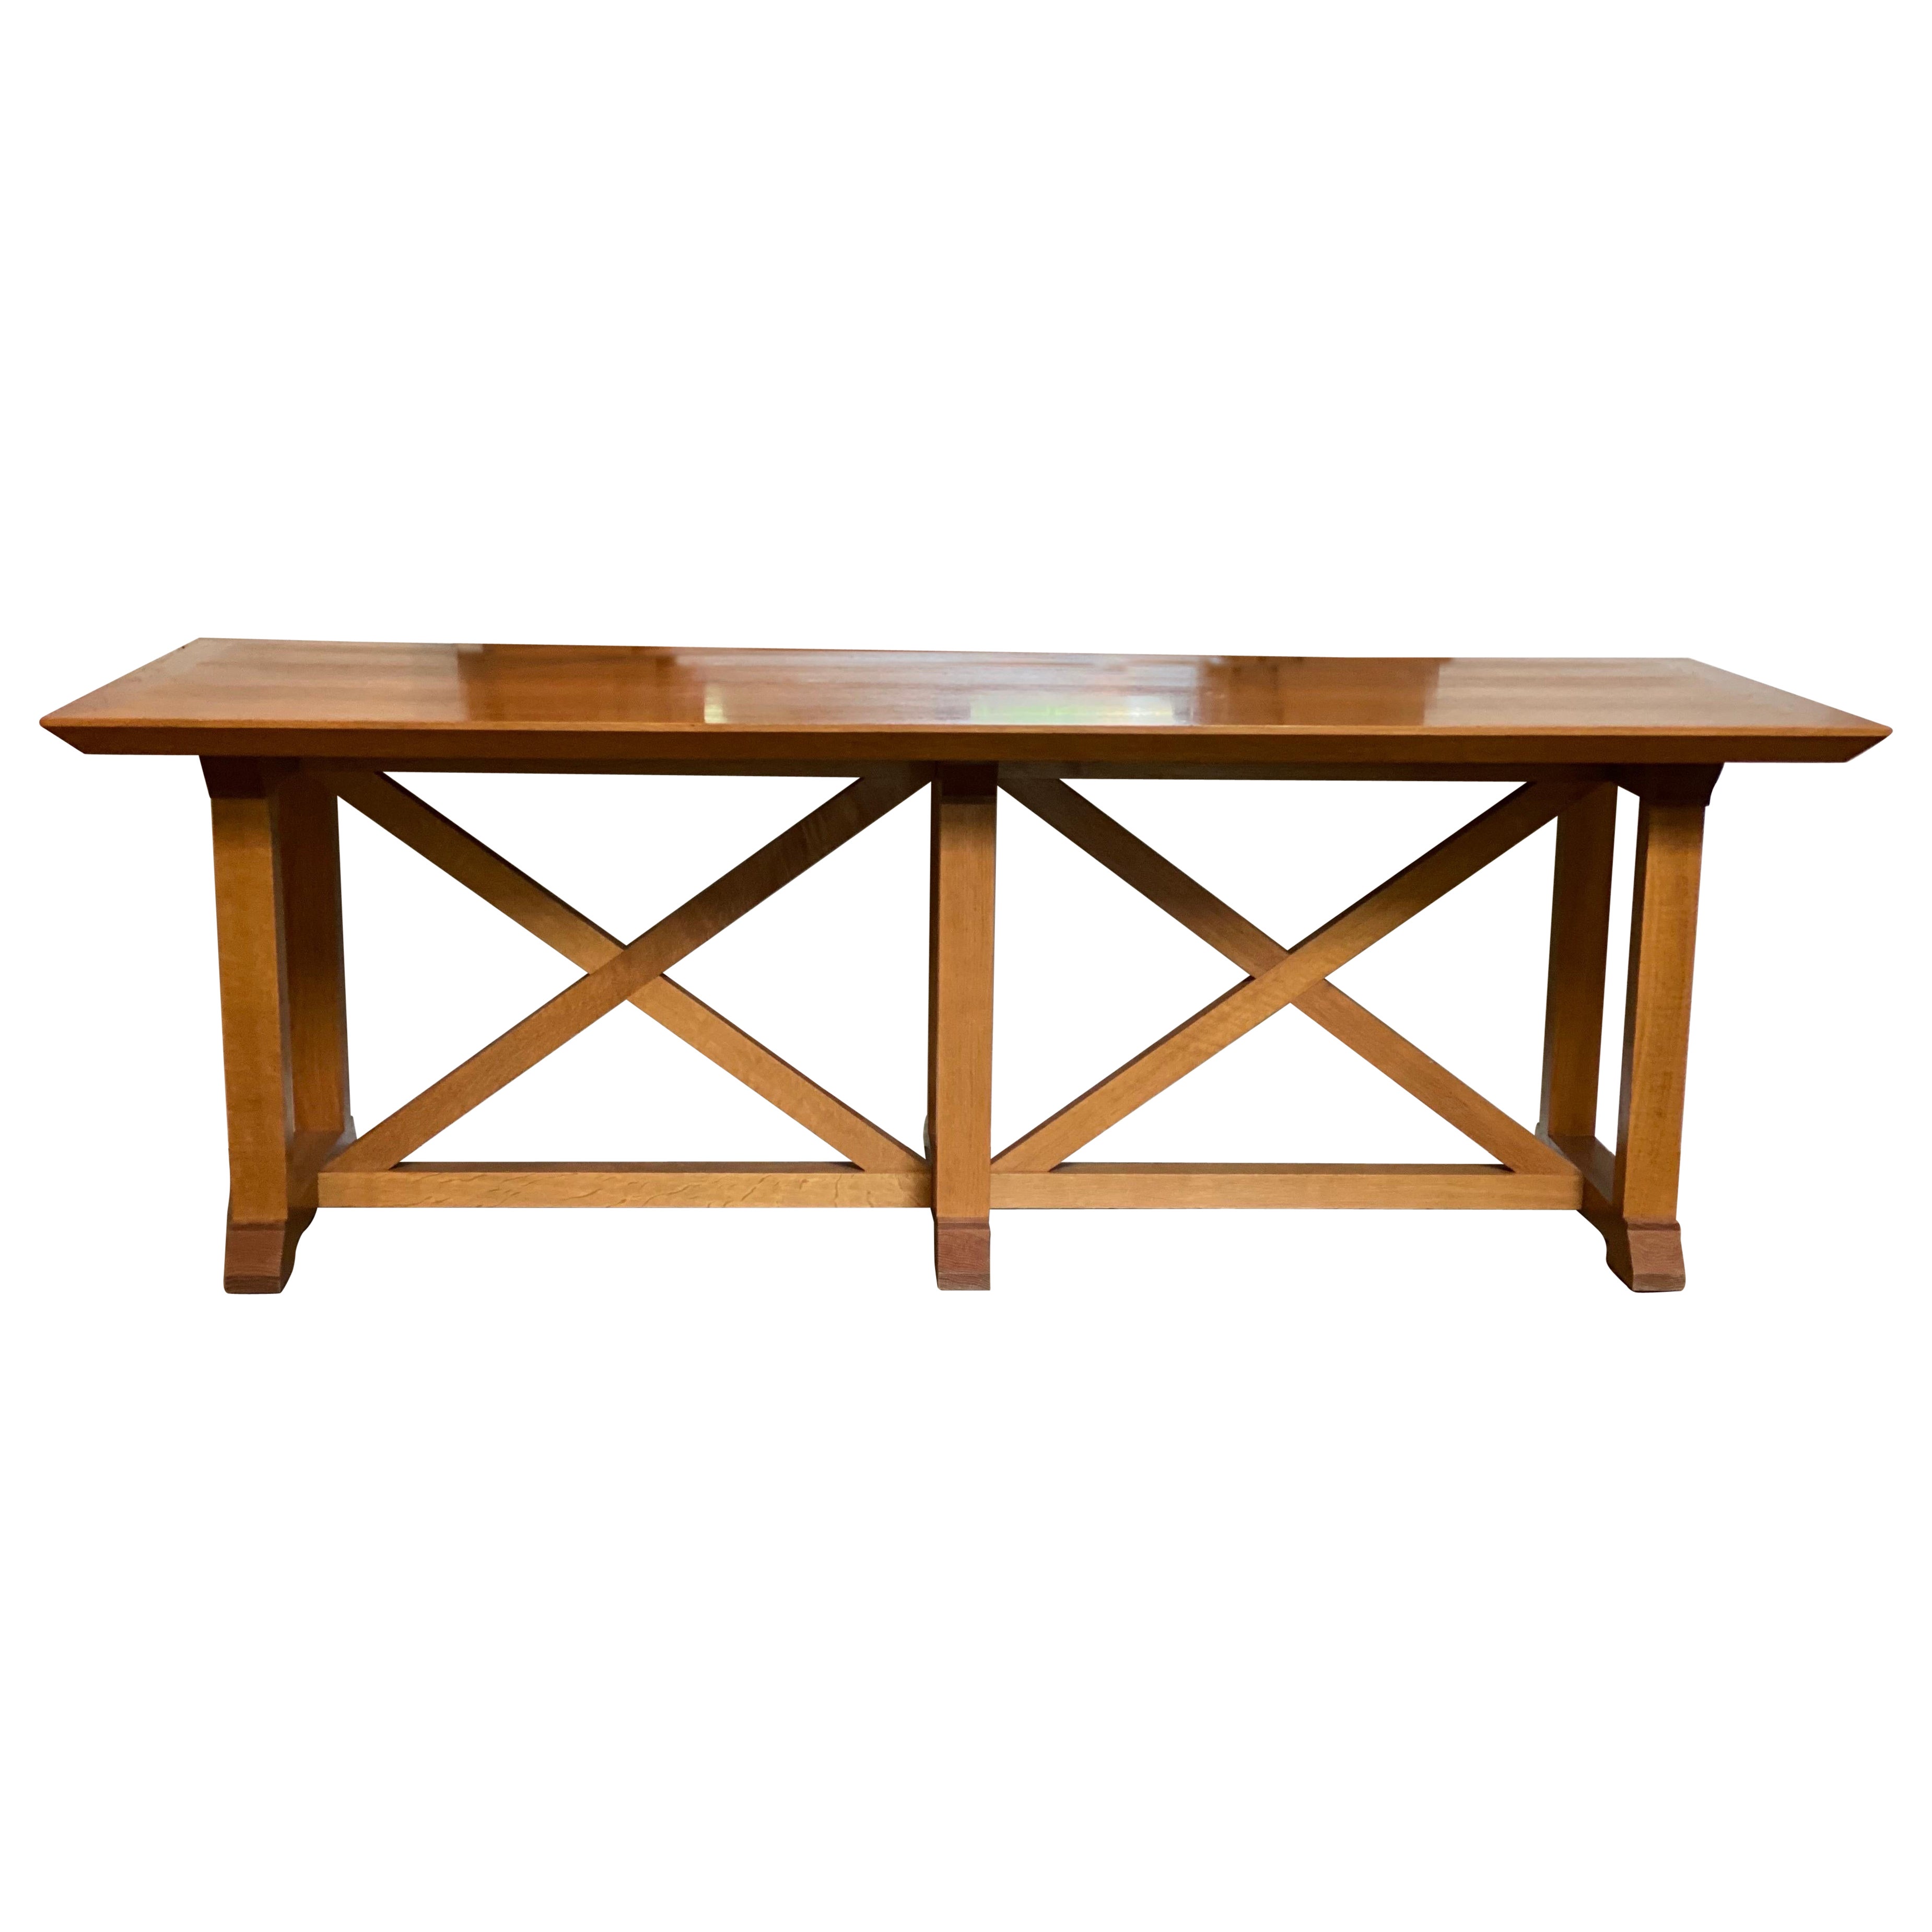 Late 20th Century Double X Base Oak Table attributed to Ralph Lauren Studio For Sale